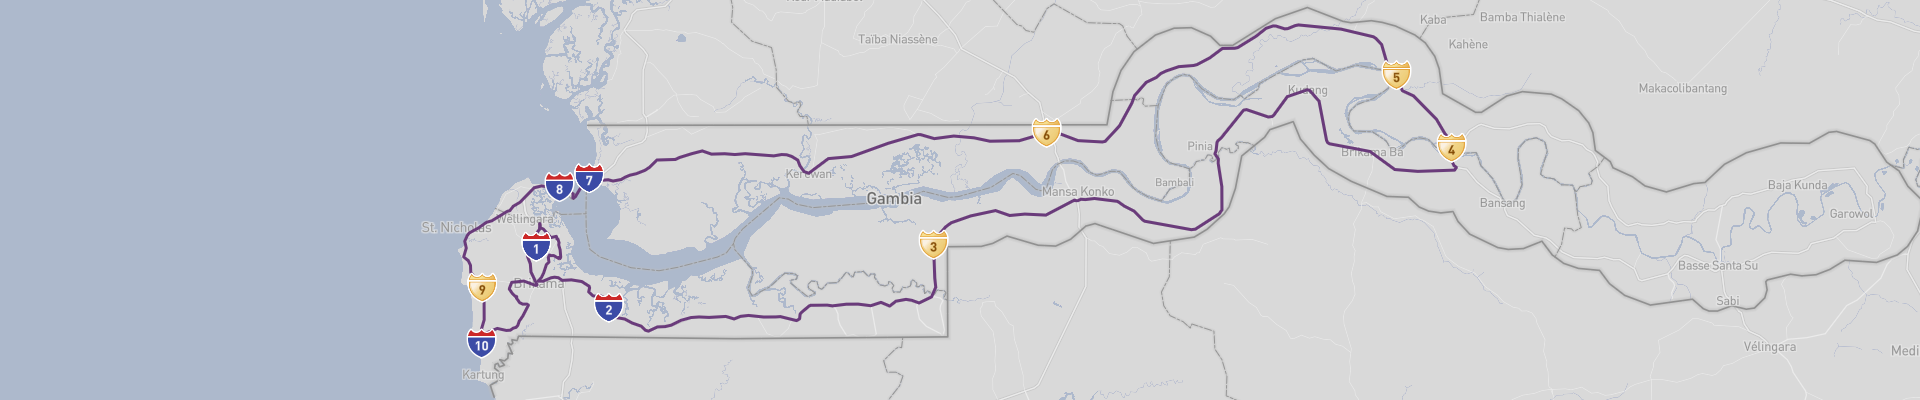 Gambia Road Trip